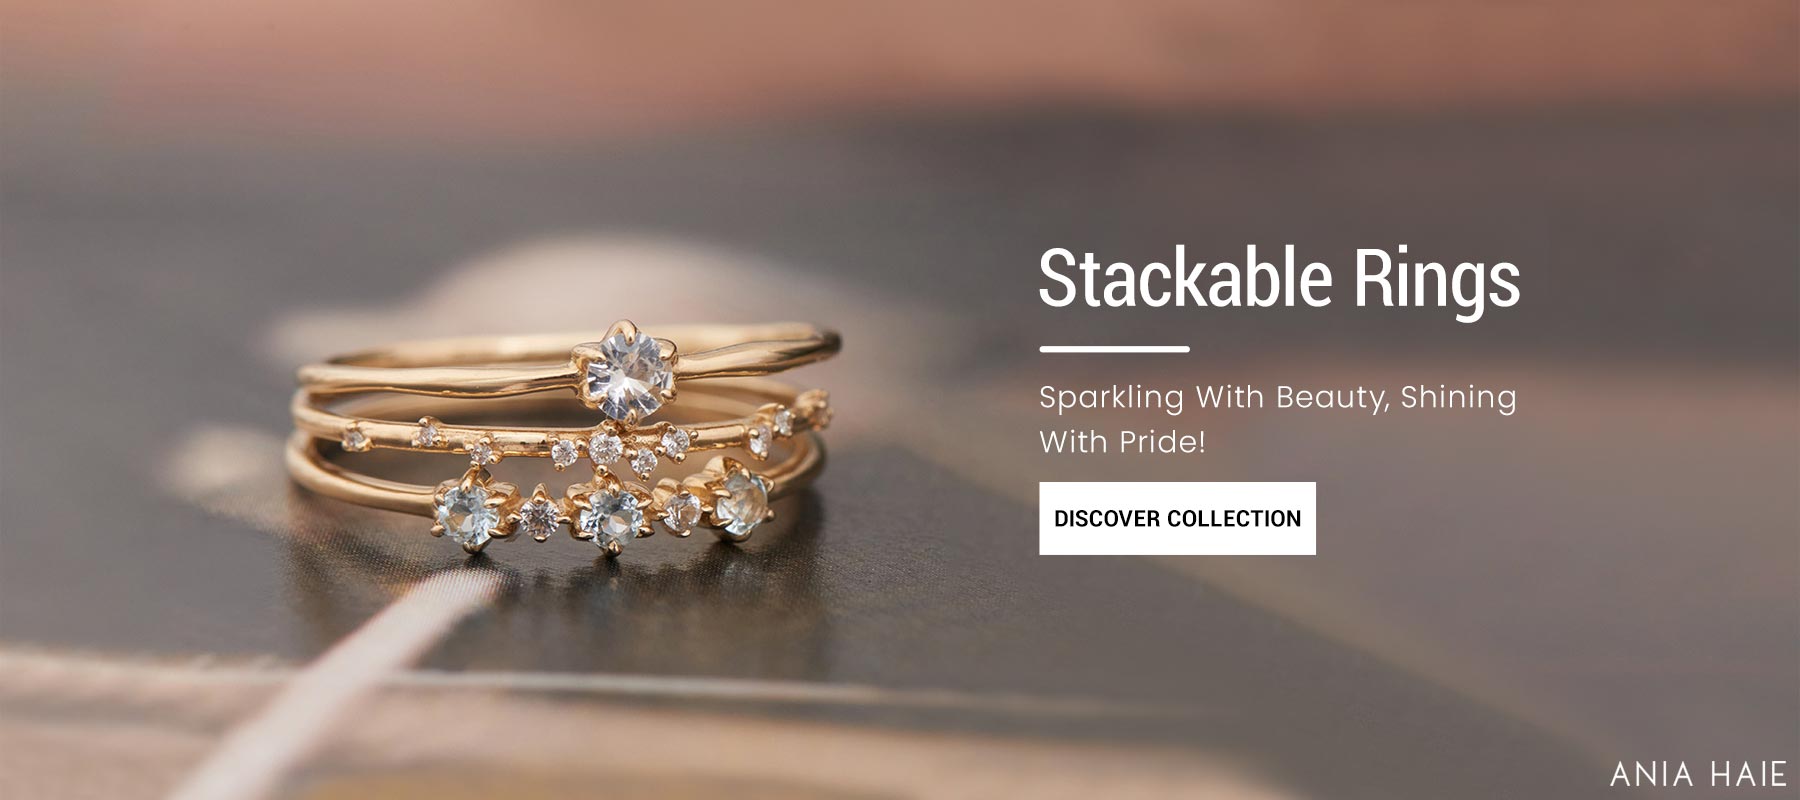 Stackable Rings at Kent Island Jewelry